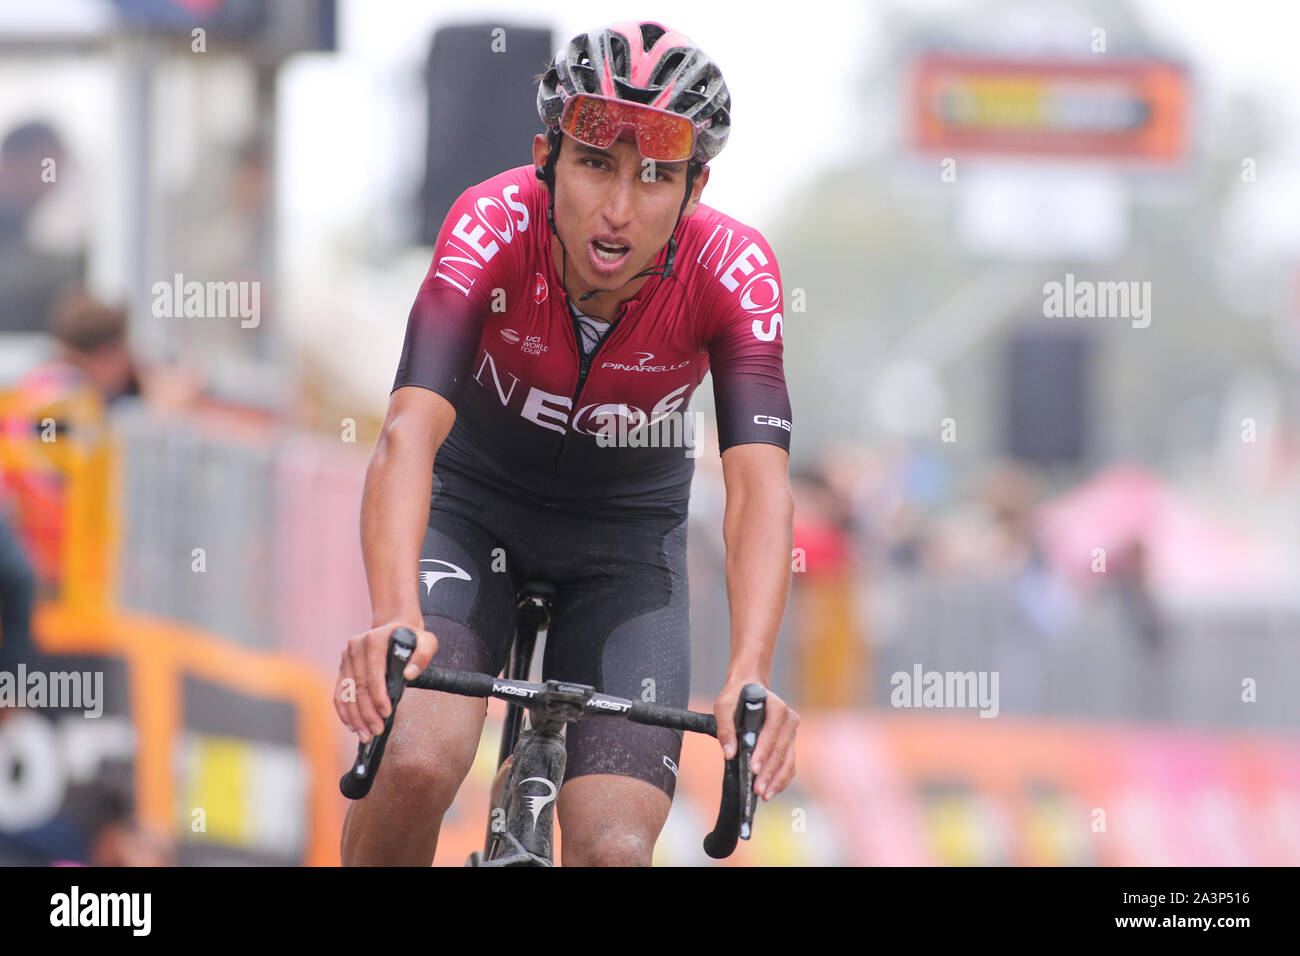 Milano, Italy, 09 Oct 2019, bernal gomez egan arley , colombia, winner  of ultimo tour de france  during Milano - Torino 2019  - Milan-Turin Cycling - Credit: LPS/Claudio Benedetto/Alamy Live News Stock Photo